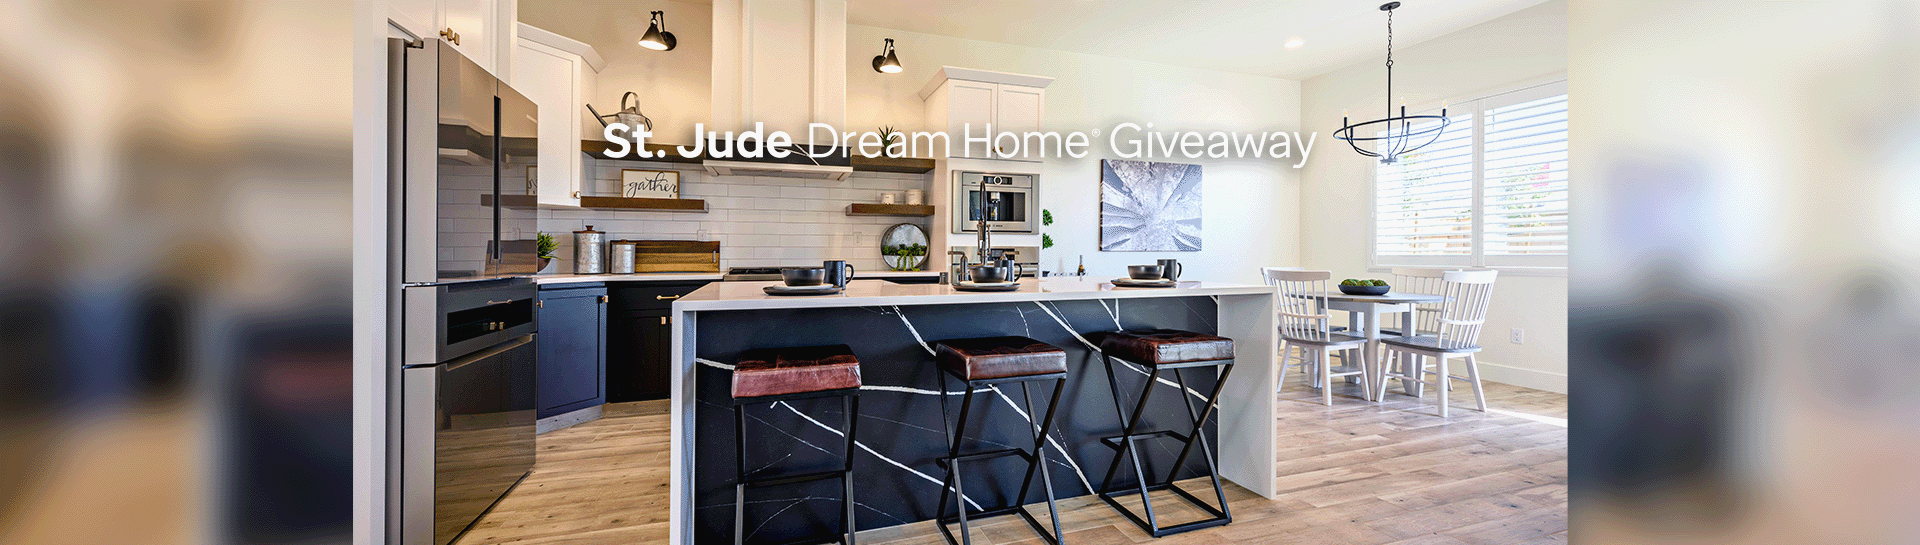 10 Reasons to Reserve your St. Jude Dream Home Ticket Today!